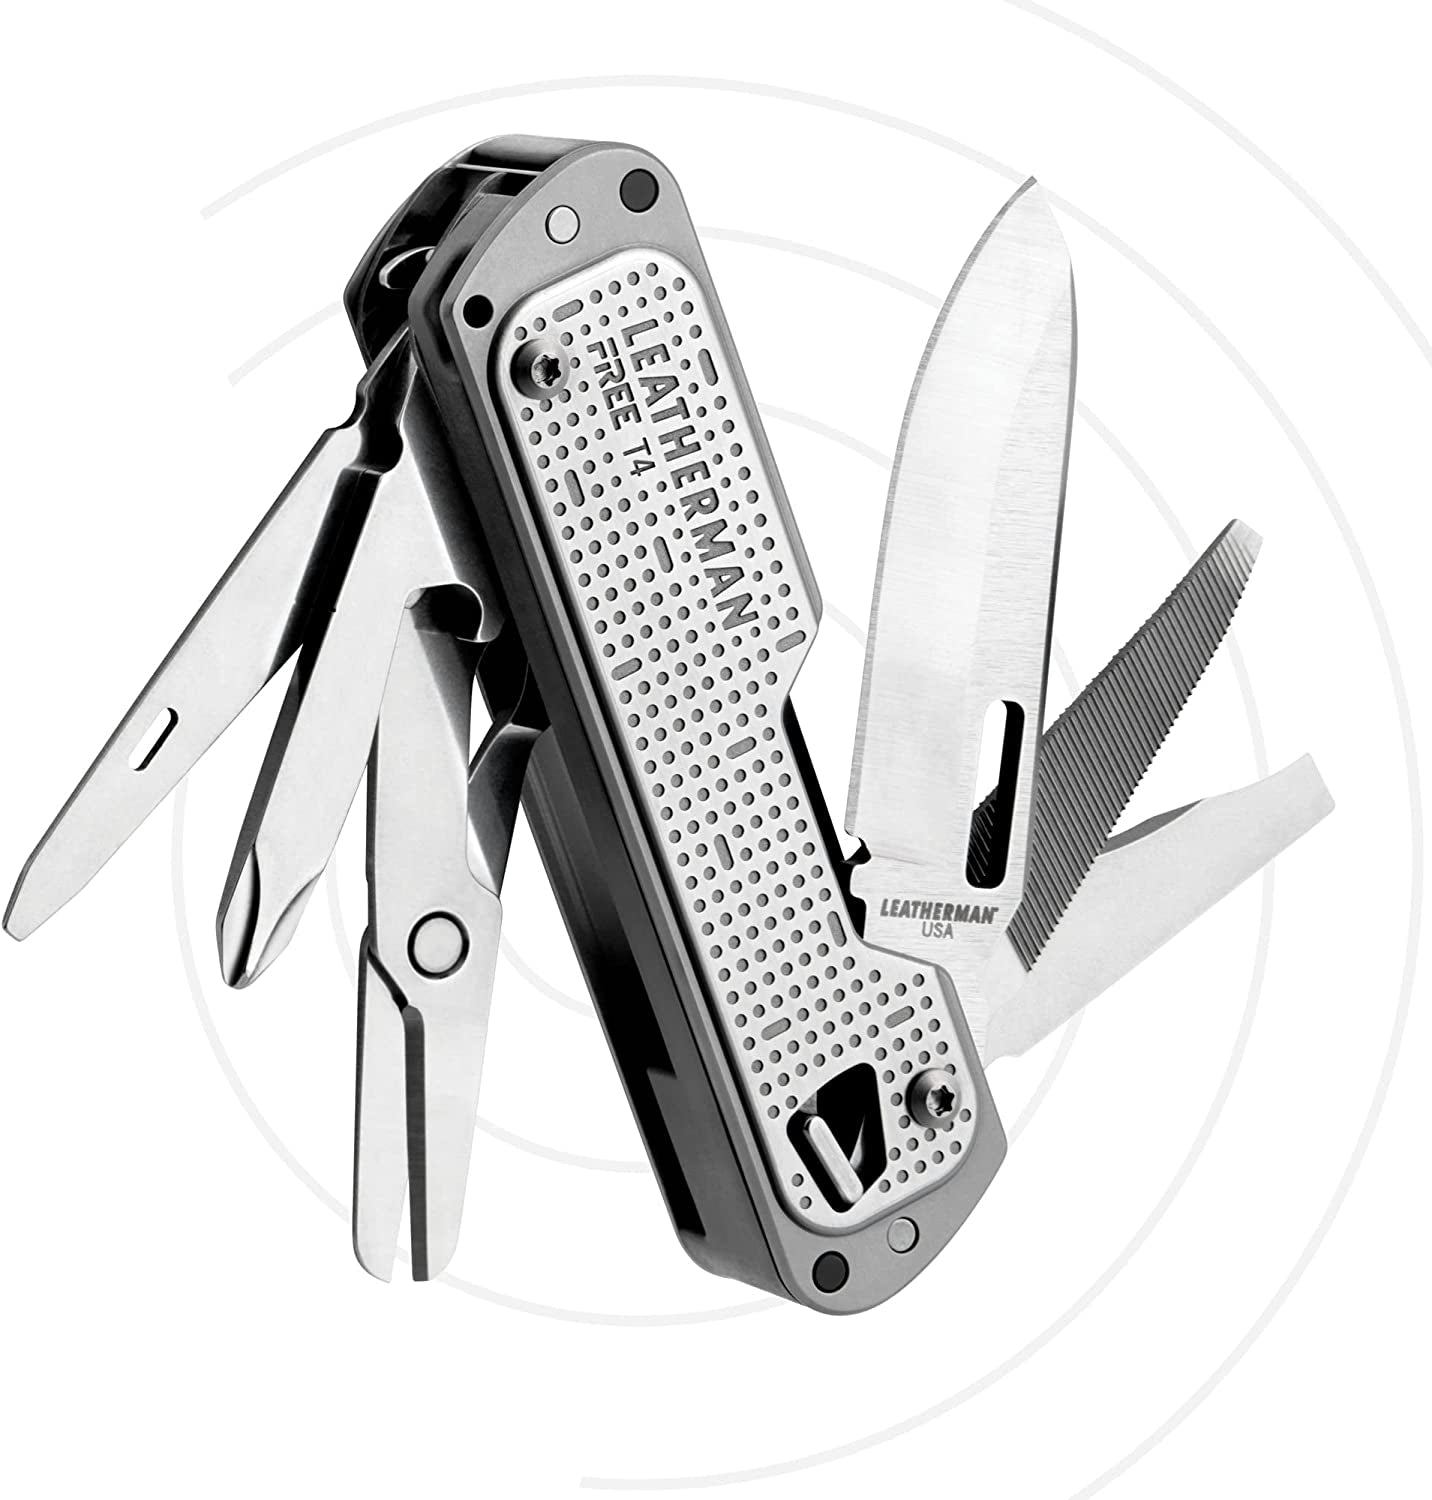 Leatherman, LEATHERMAN - FREE T4 Multitool and EDC Pocket Knife with Magnetic Locking and One Hand Accessible Tools